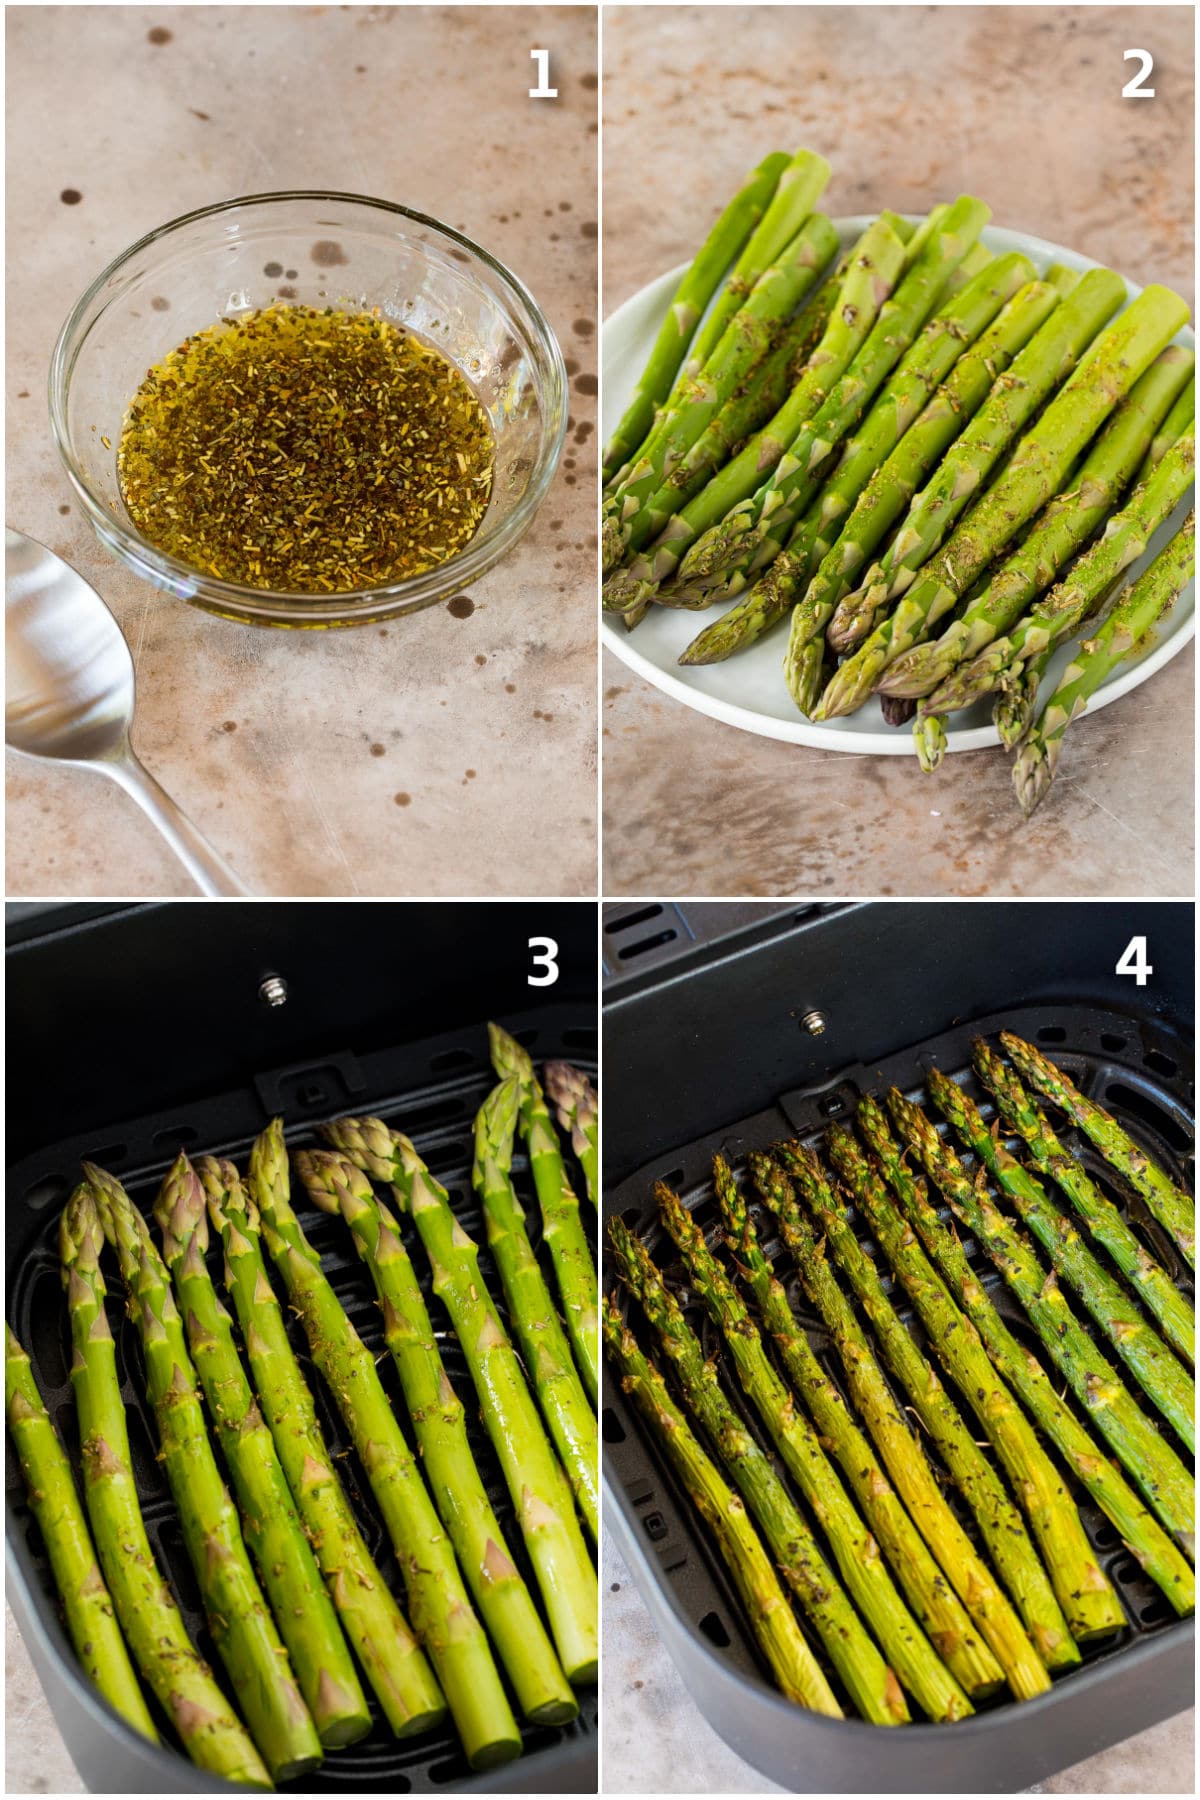 Step by step shots showing how to air fry asparagus.